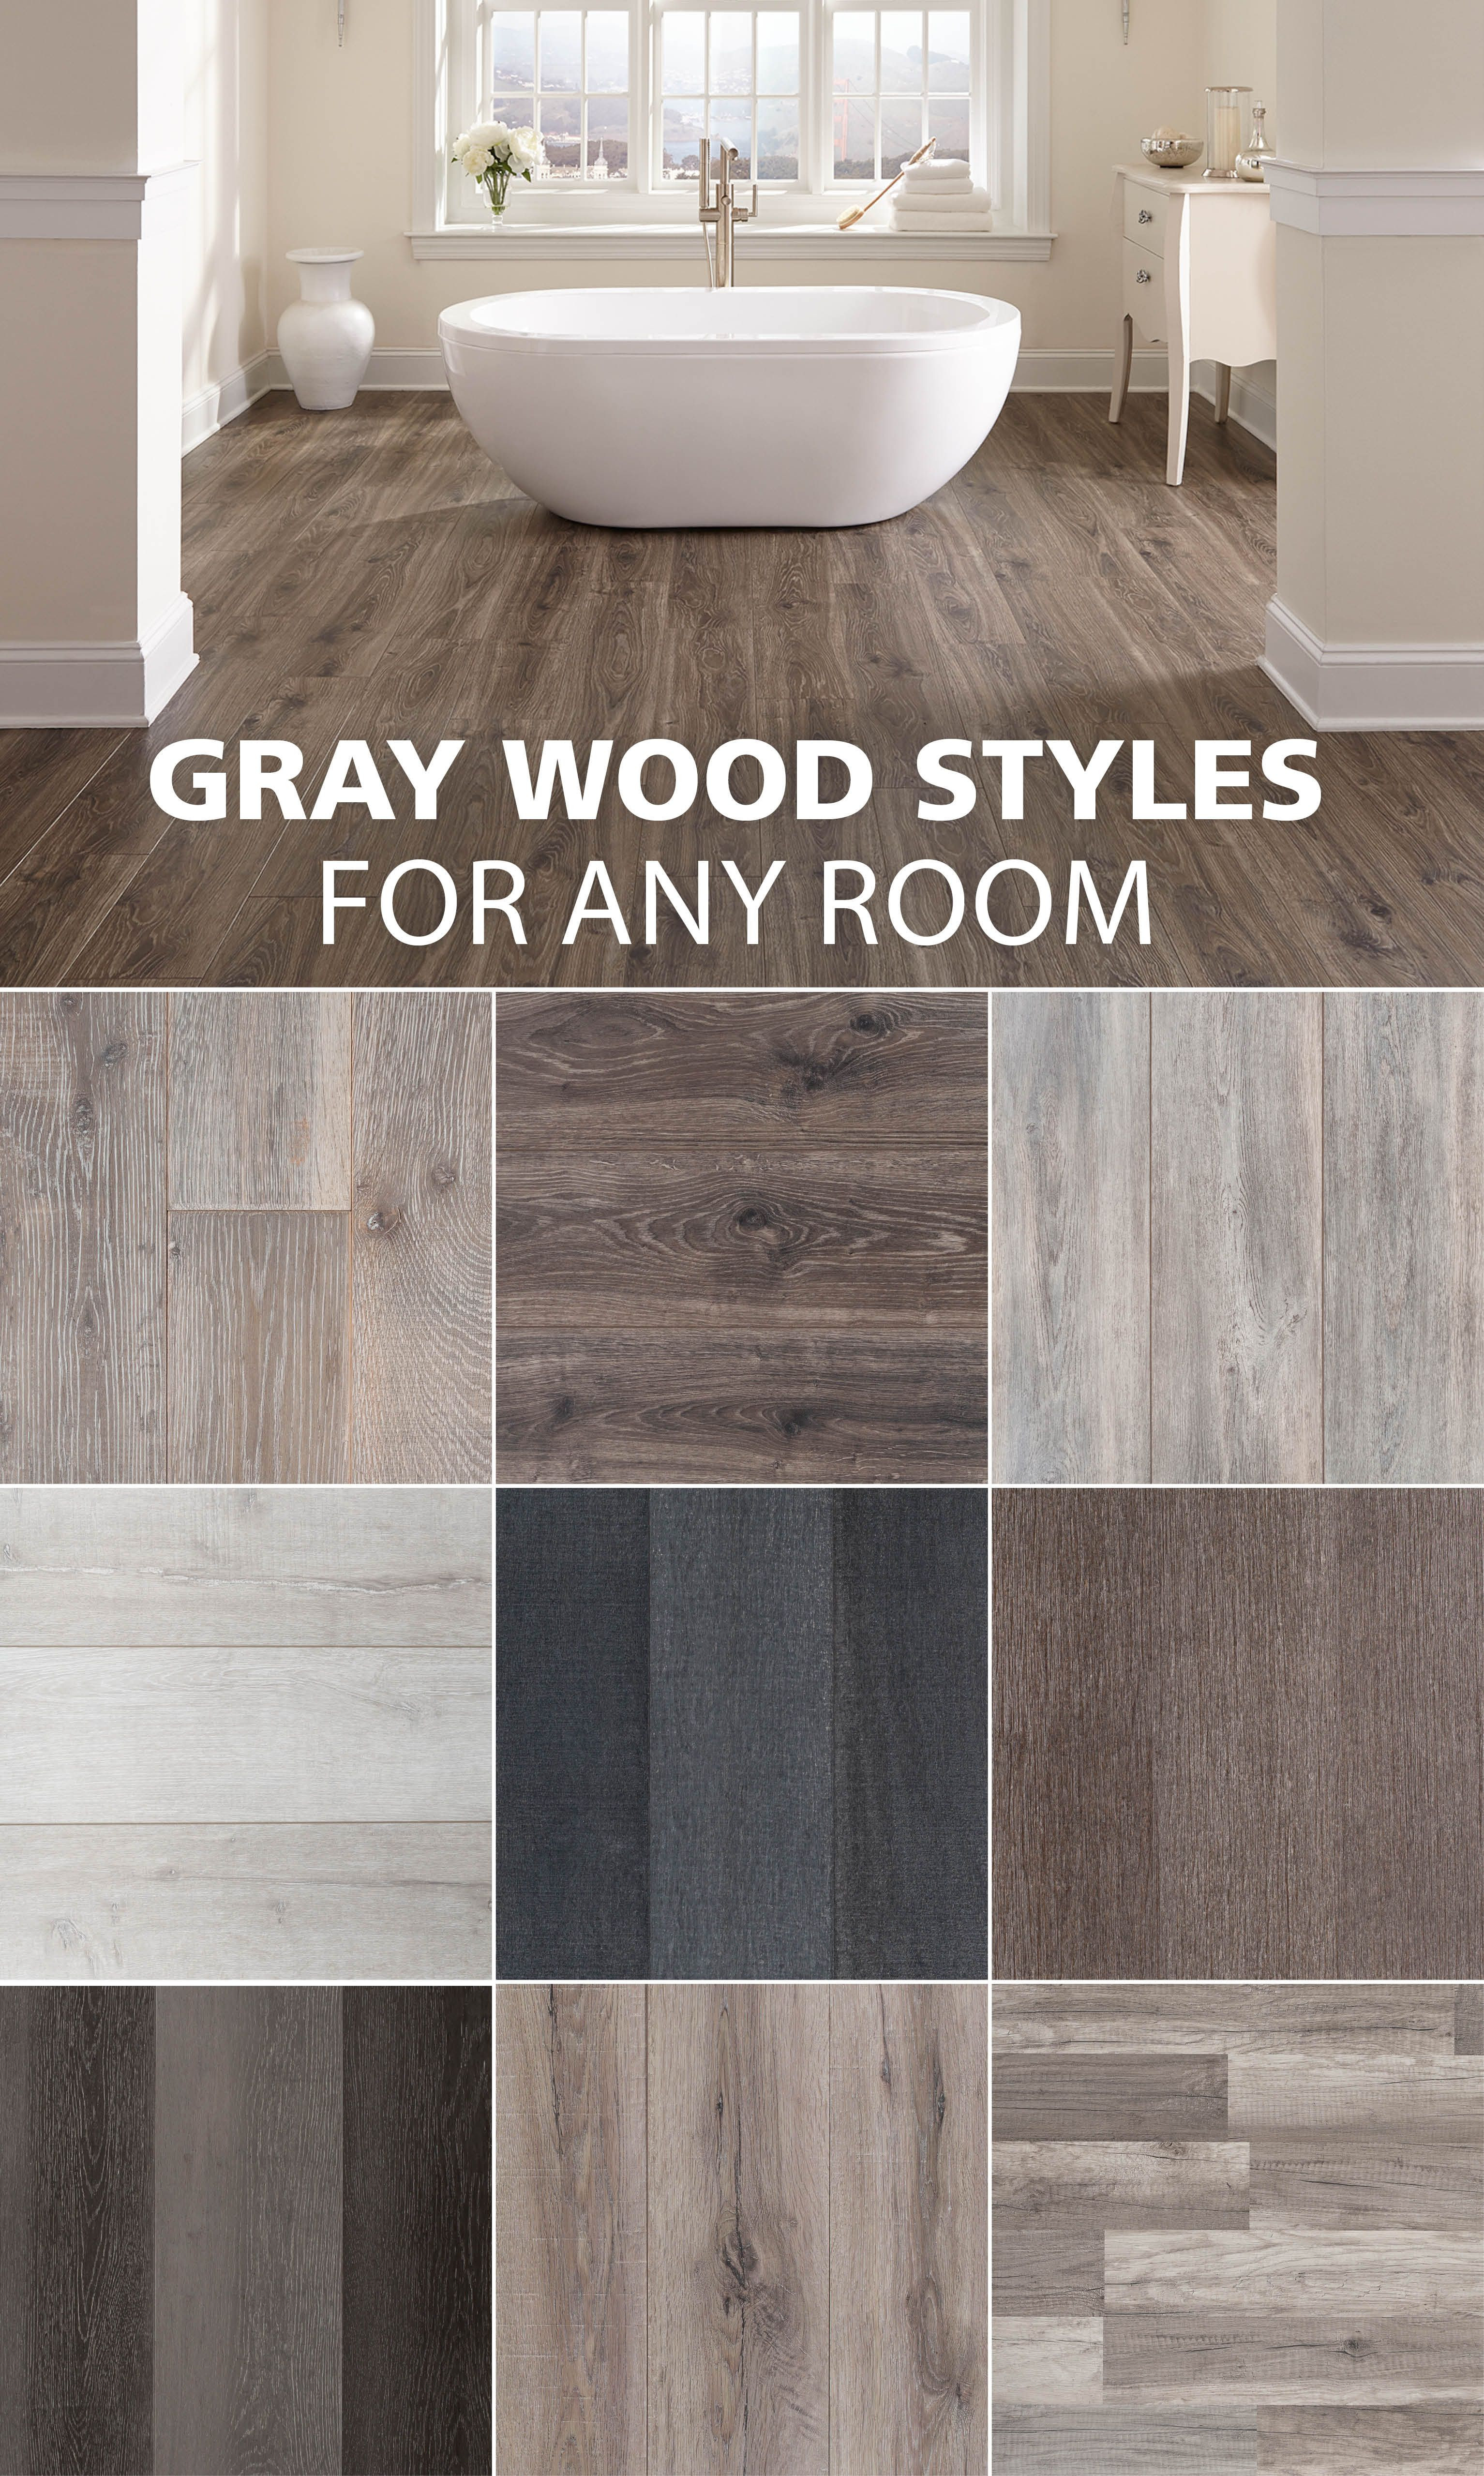 18 Unique Prefinished Hardwood Flooring Installation Cost Per Square Foot 2024 free download prefinished hardwood flooring installation cost per square foot of here are some of our favorite gray wood look styles home decor regarding here are some of our favorite gray wood look style